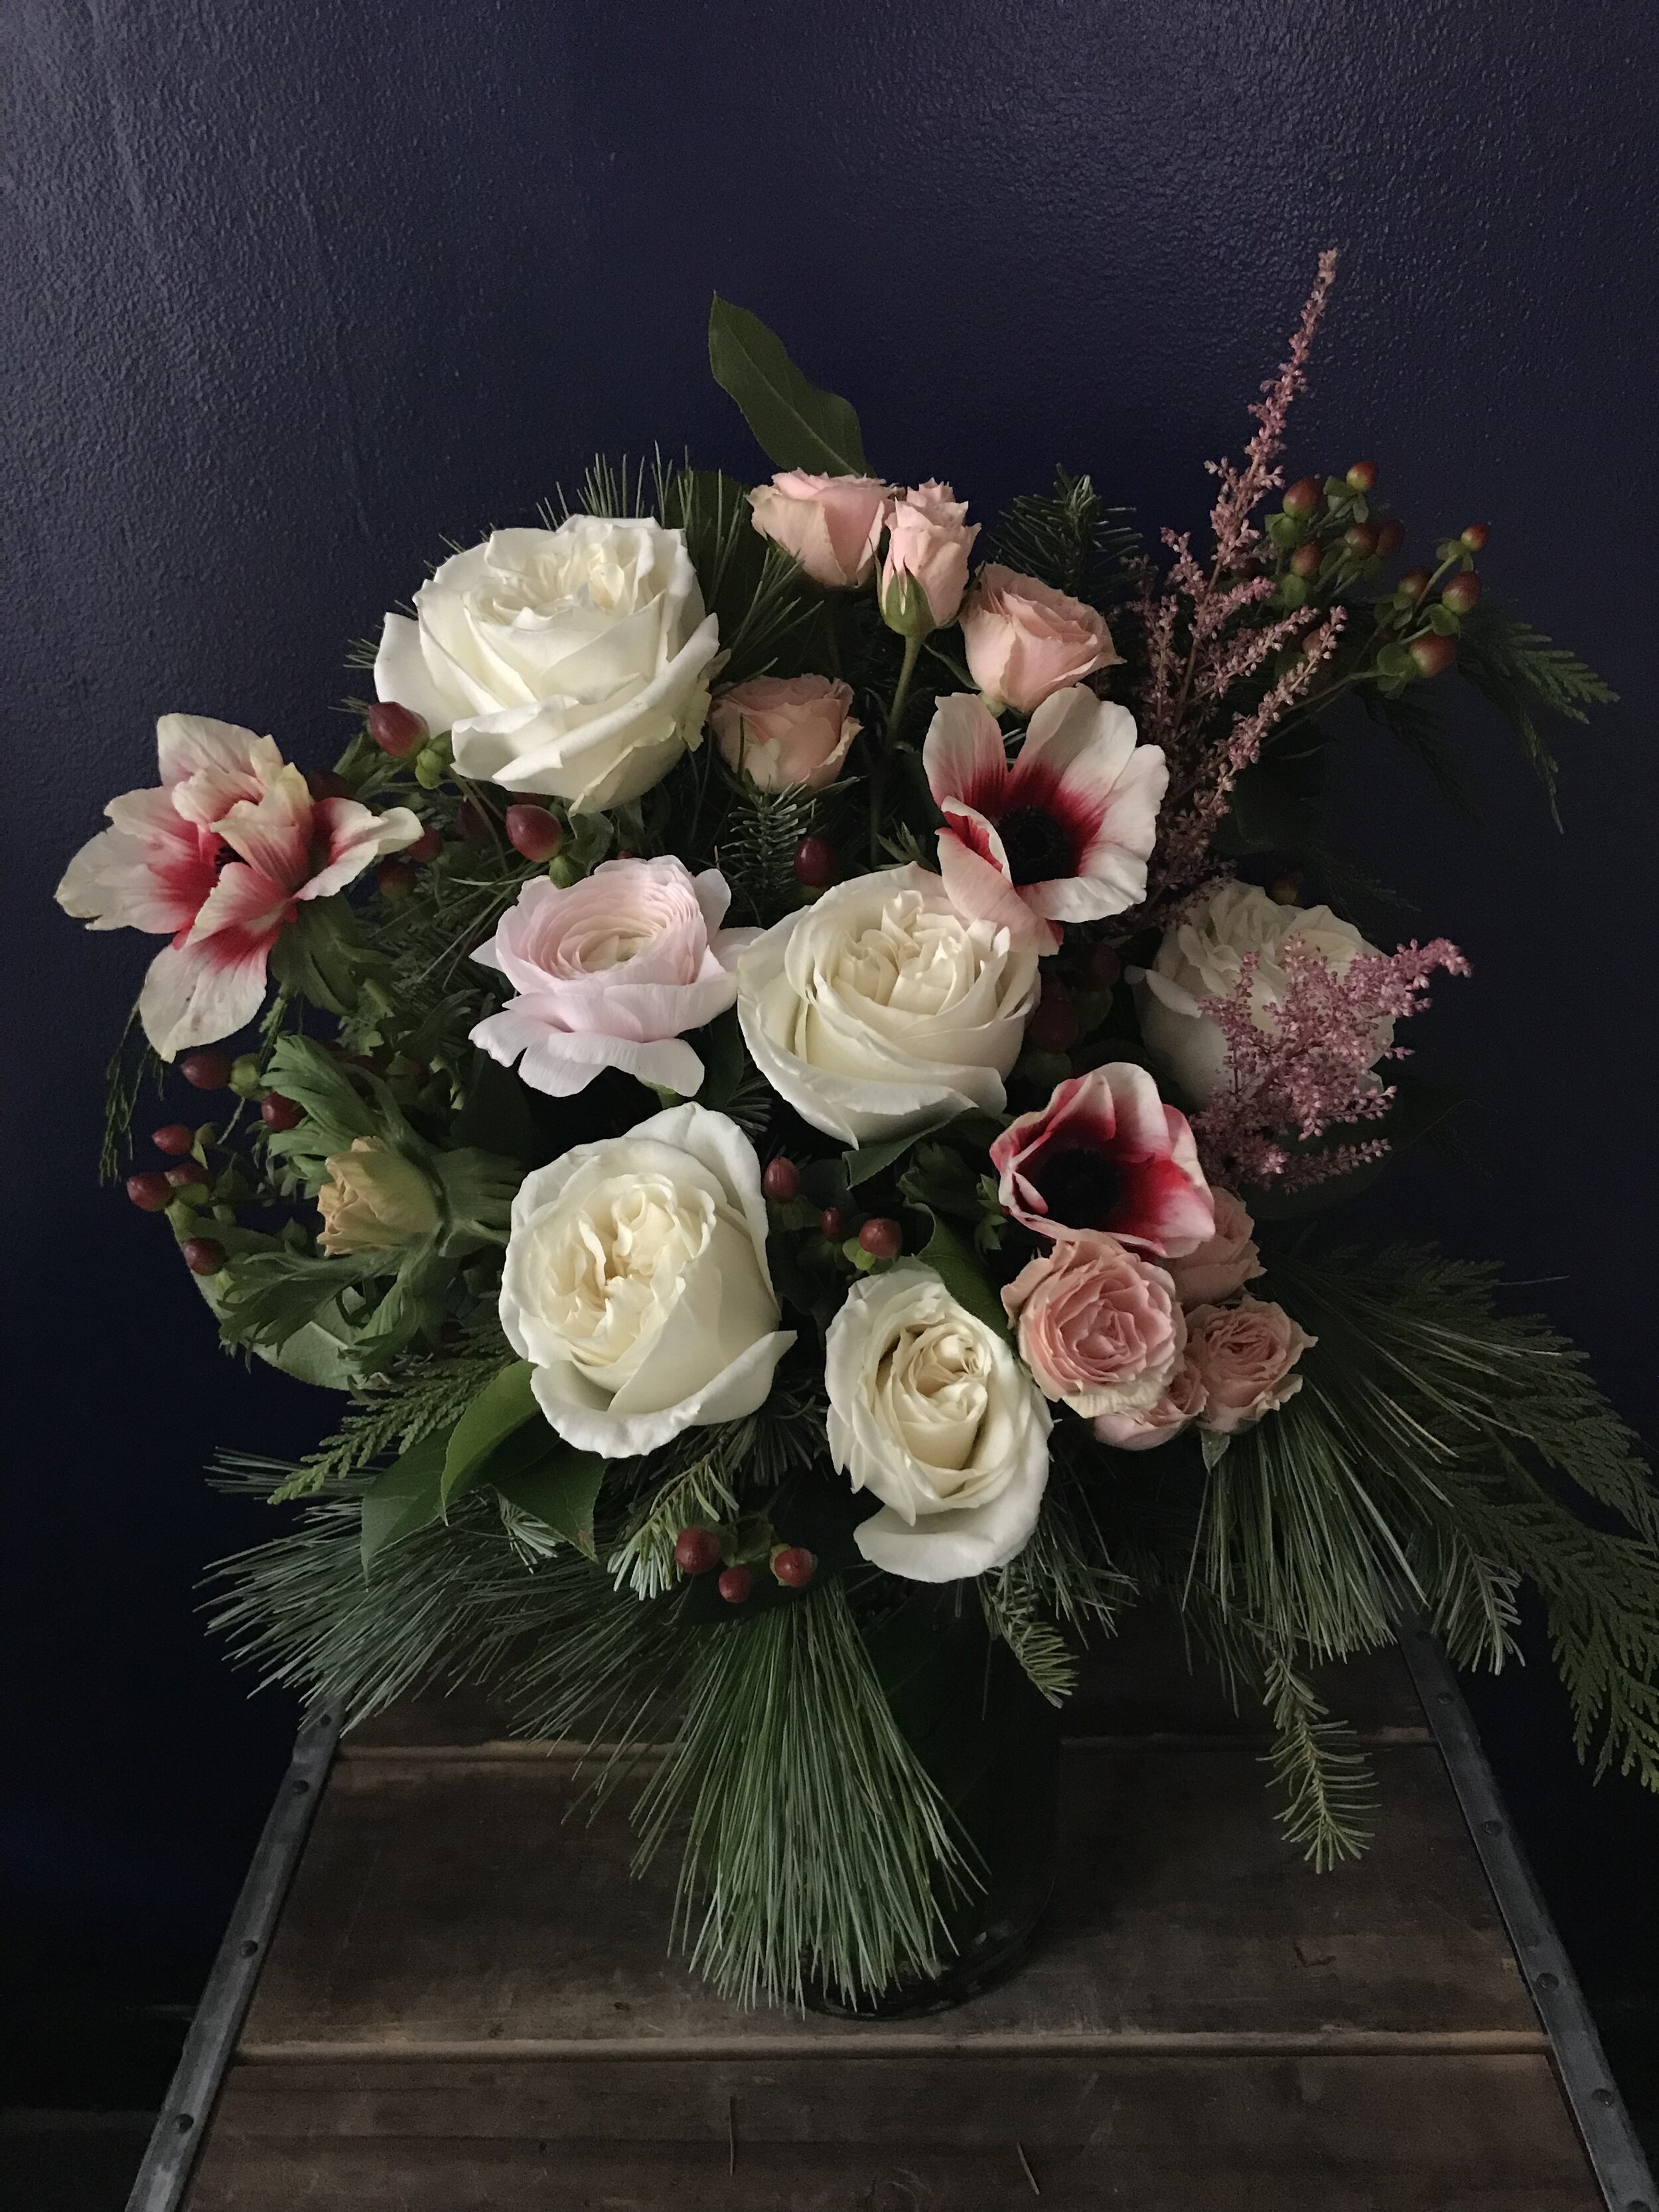  NYC Wedding Florist, Interview with Barbara Mele 